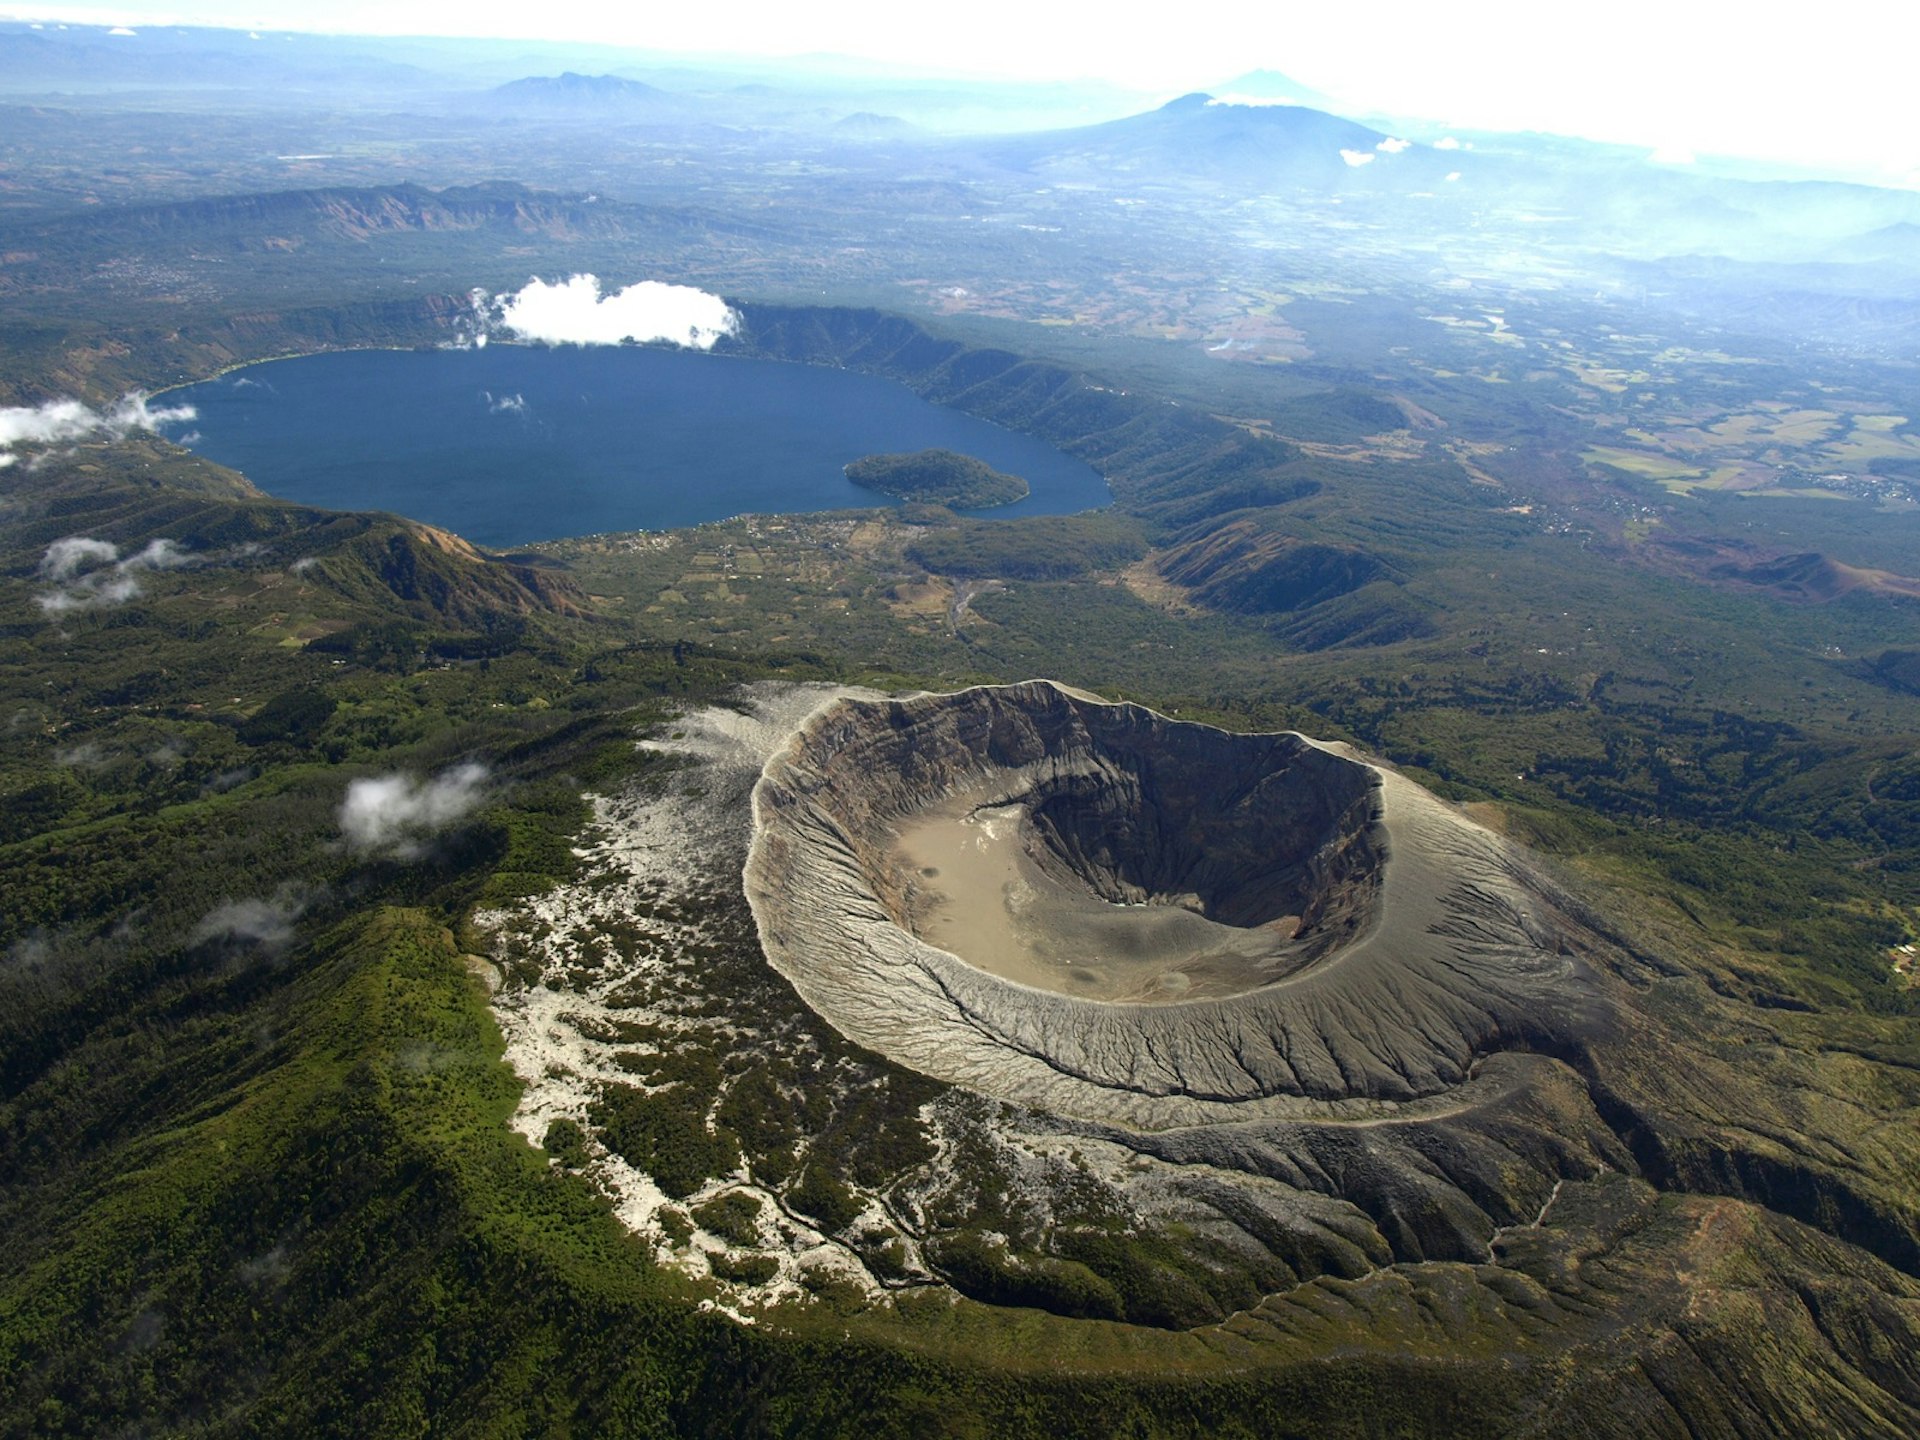 Aerial view of the Santa Ana Volcano crater and Lake Coatepeque in El Salvador